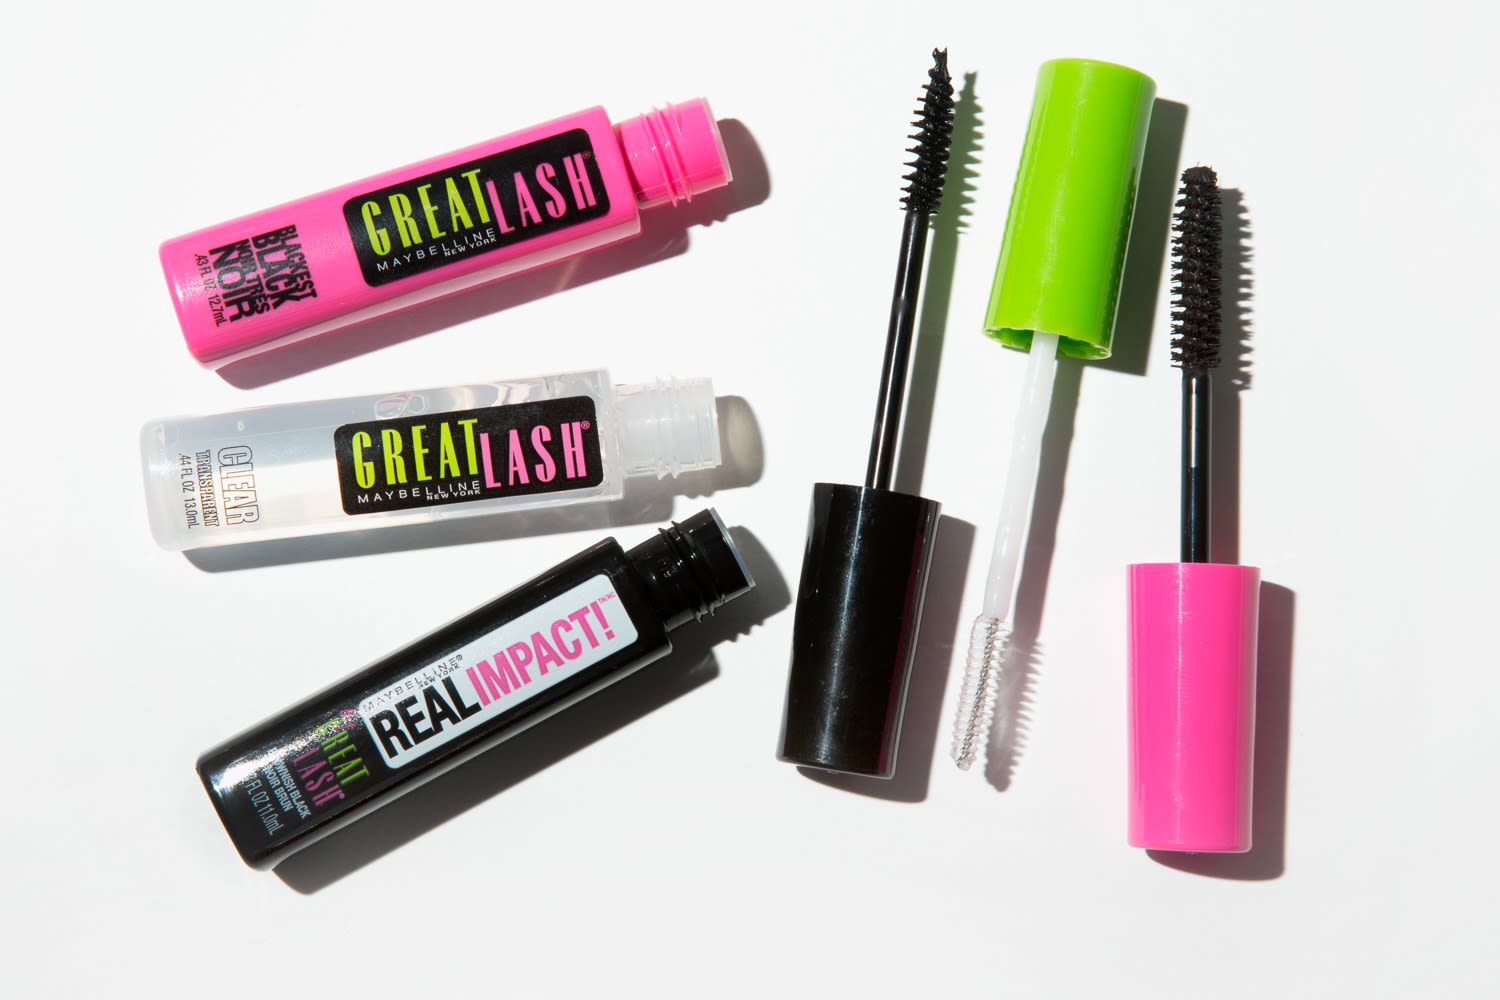 Maybelline Great Lash: A Journey